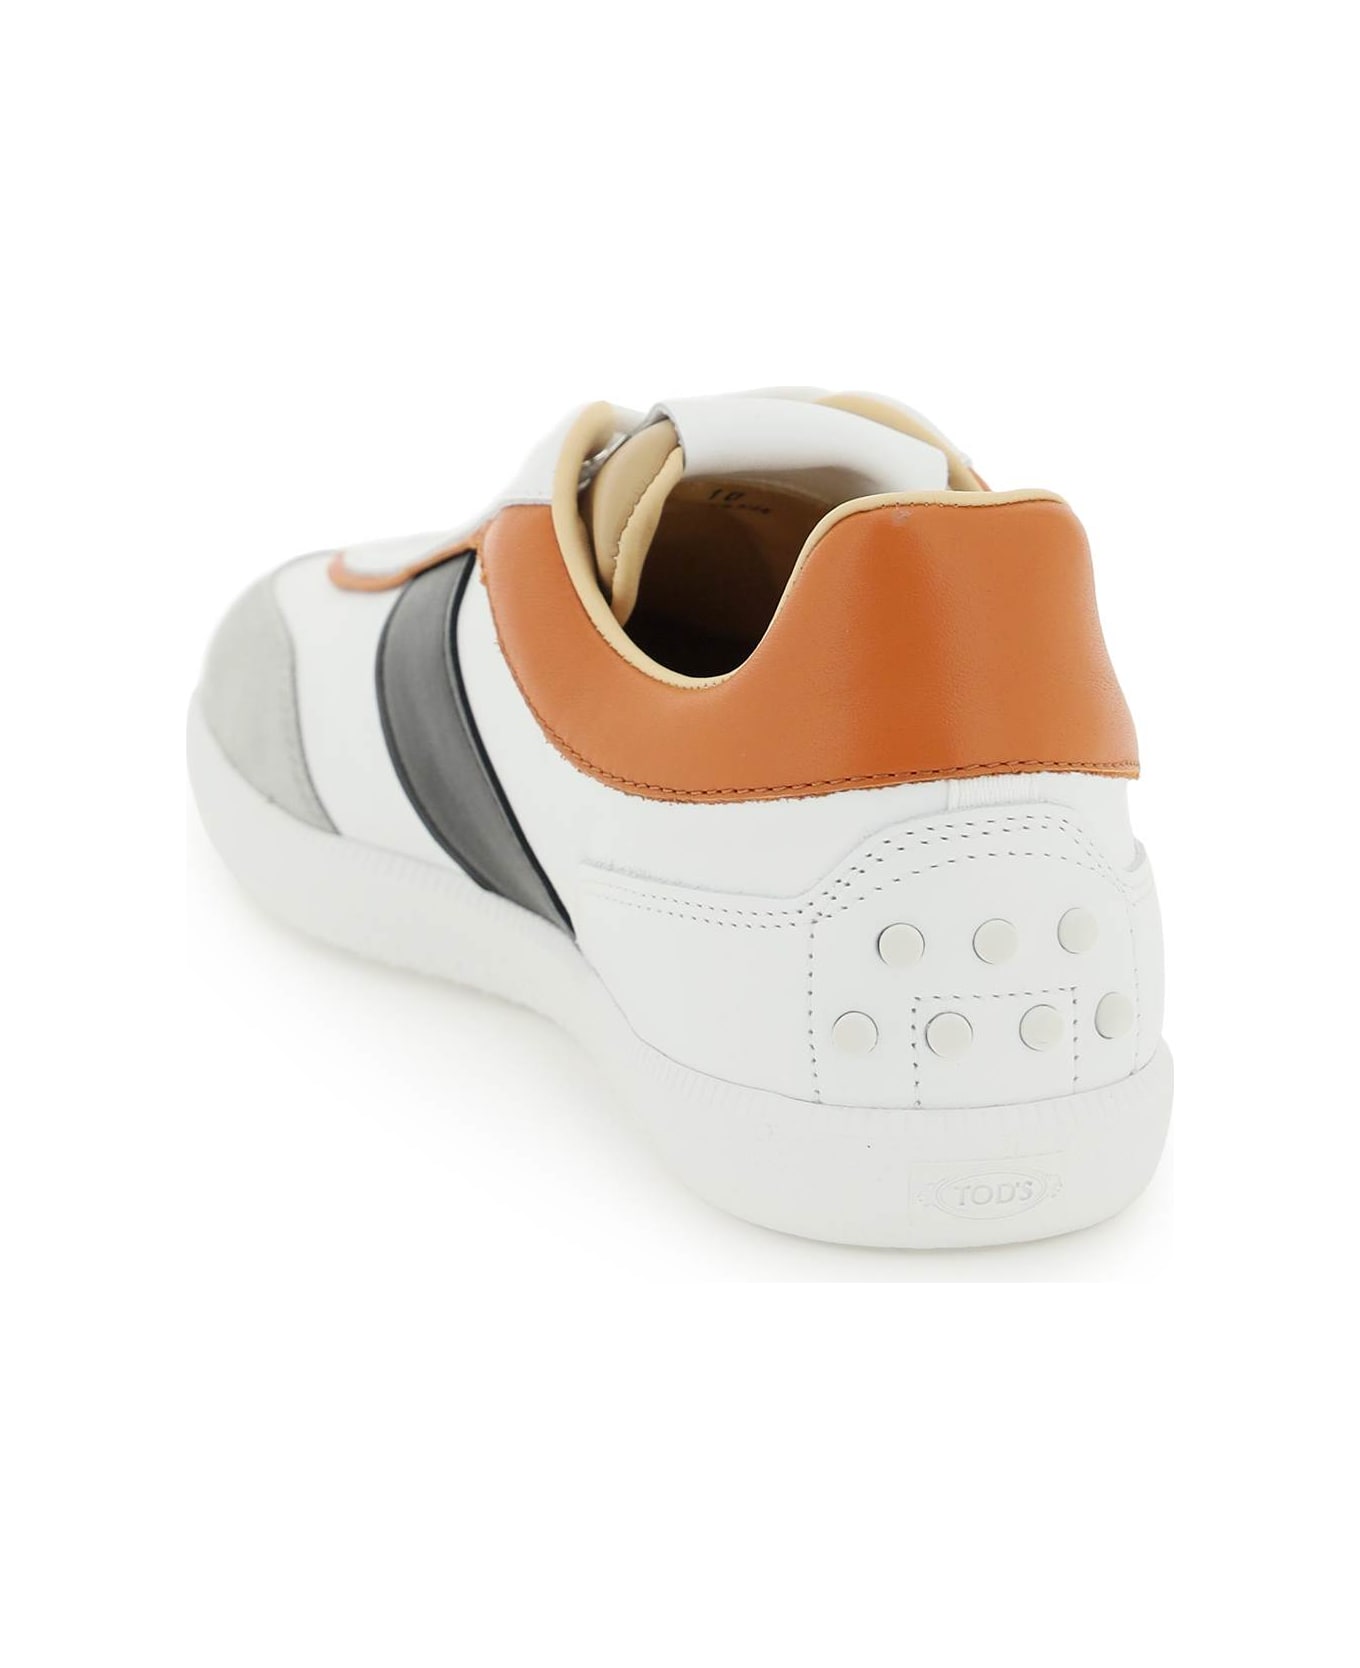 Tod's Low-top Sneakers From - GRIGIO MEDIO BIANCO G832 B999 C807 (White)